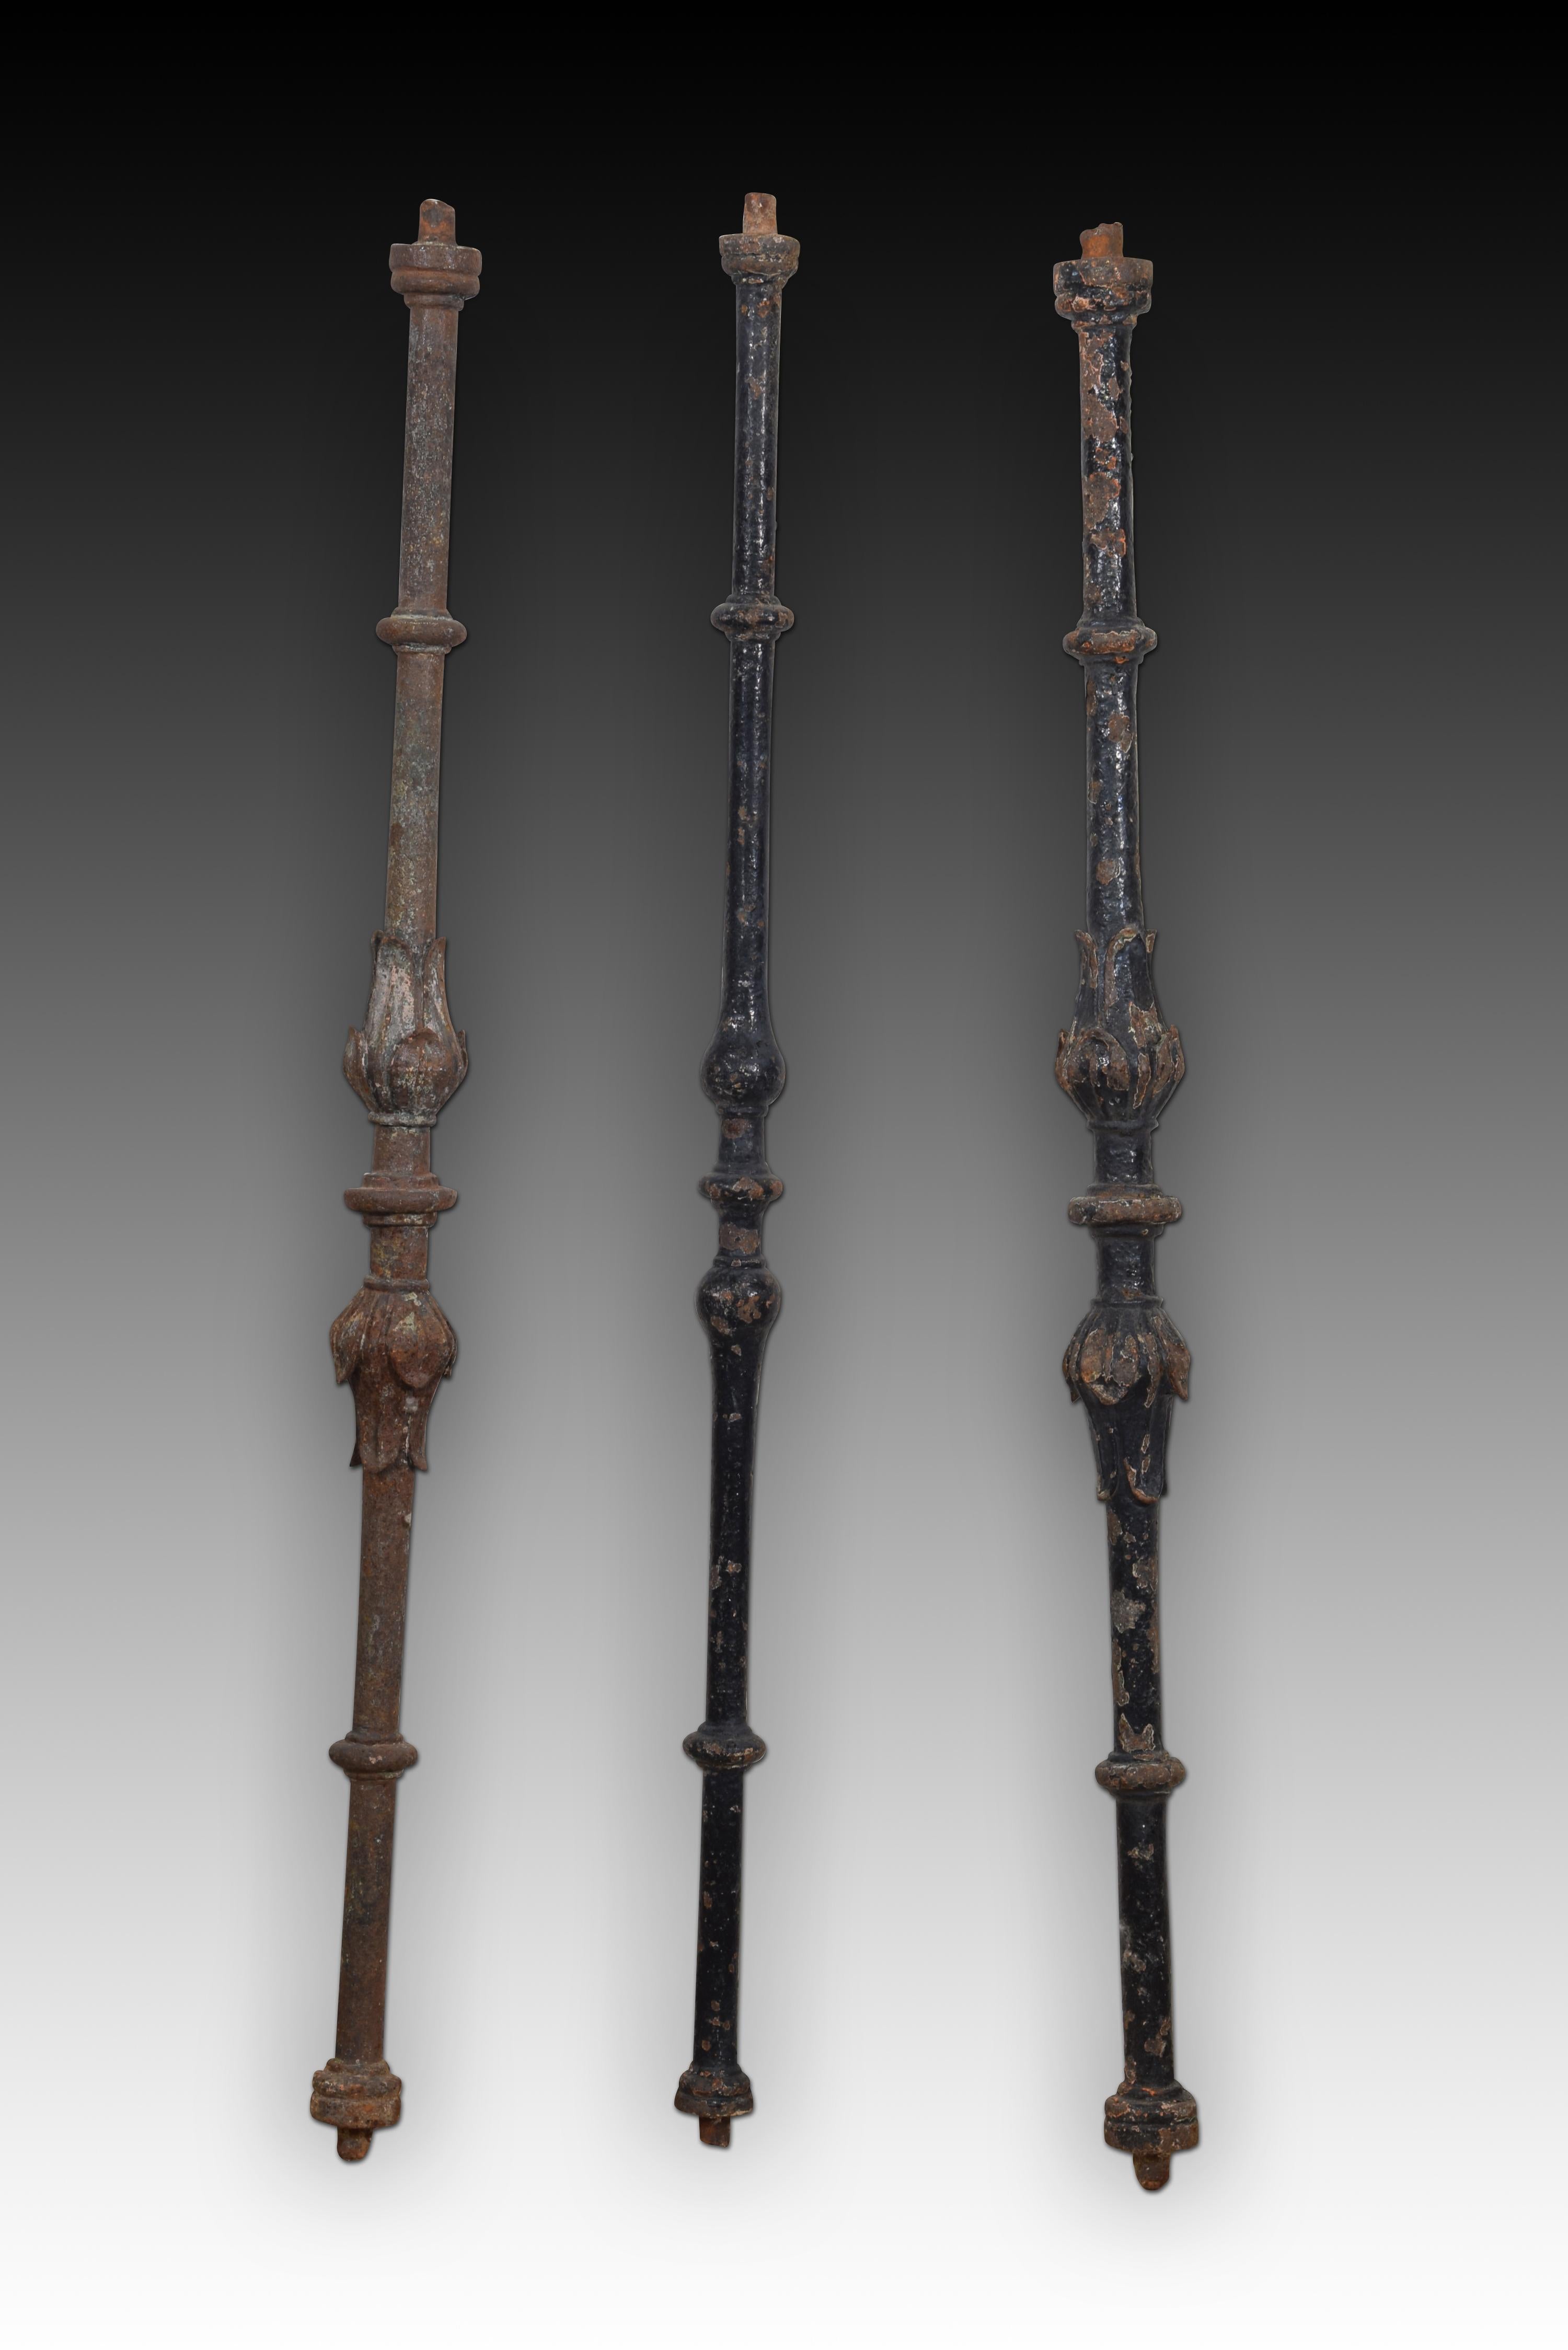 Balcony baluster. Wrought iron. XVII century. 
Balcony railing or baluster made of wrought iron and decorated with discs, moldings and a composition in the center of two facing vase shapes (some enhanced with plant elements) and separated by another